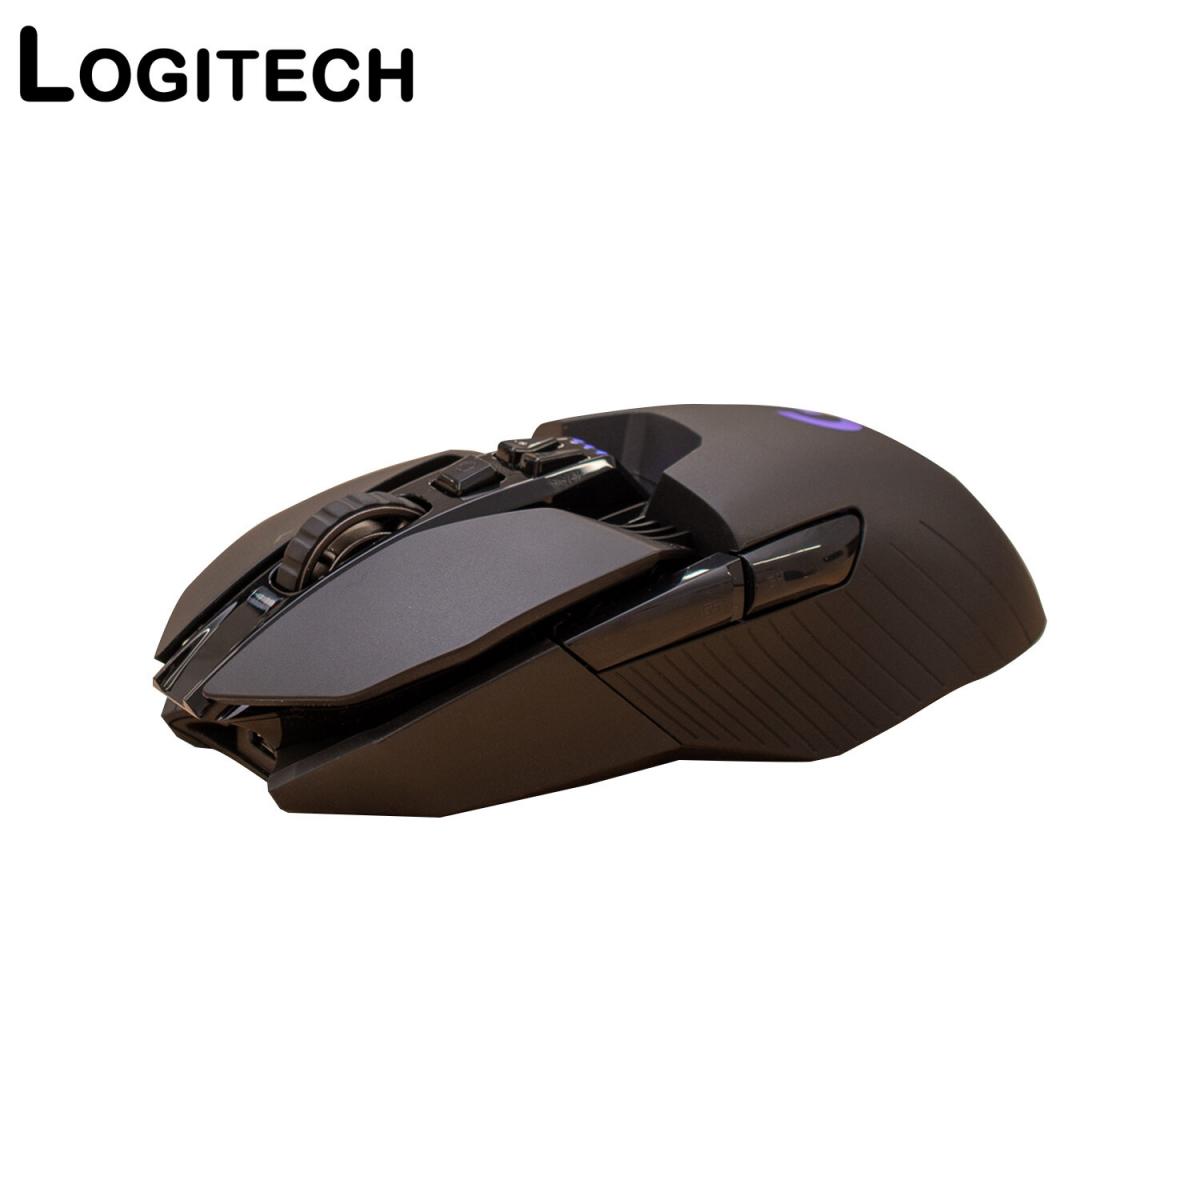 G903 LIGHTSPEED WIRELESS GAMING MOUSE WITH PMW3366 SENSOR (Parallel Goods)